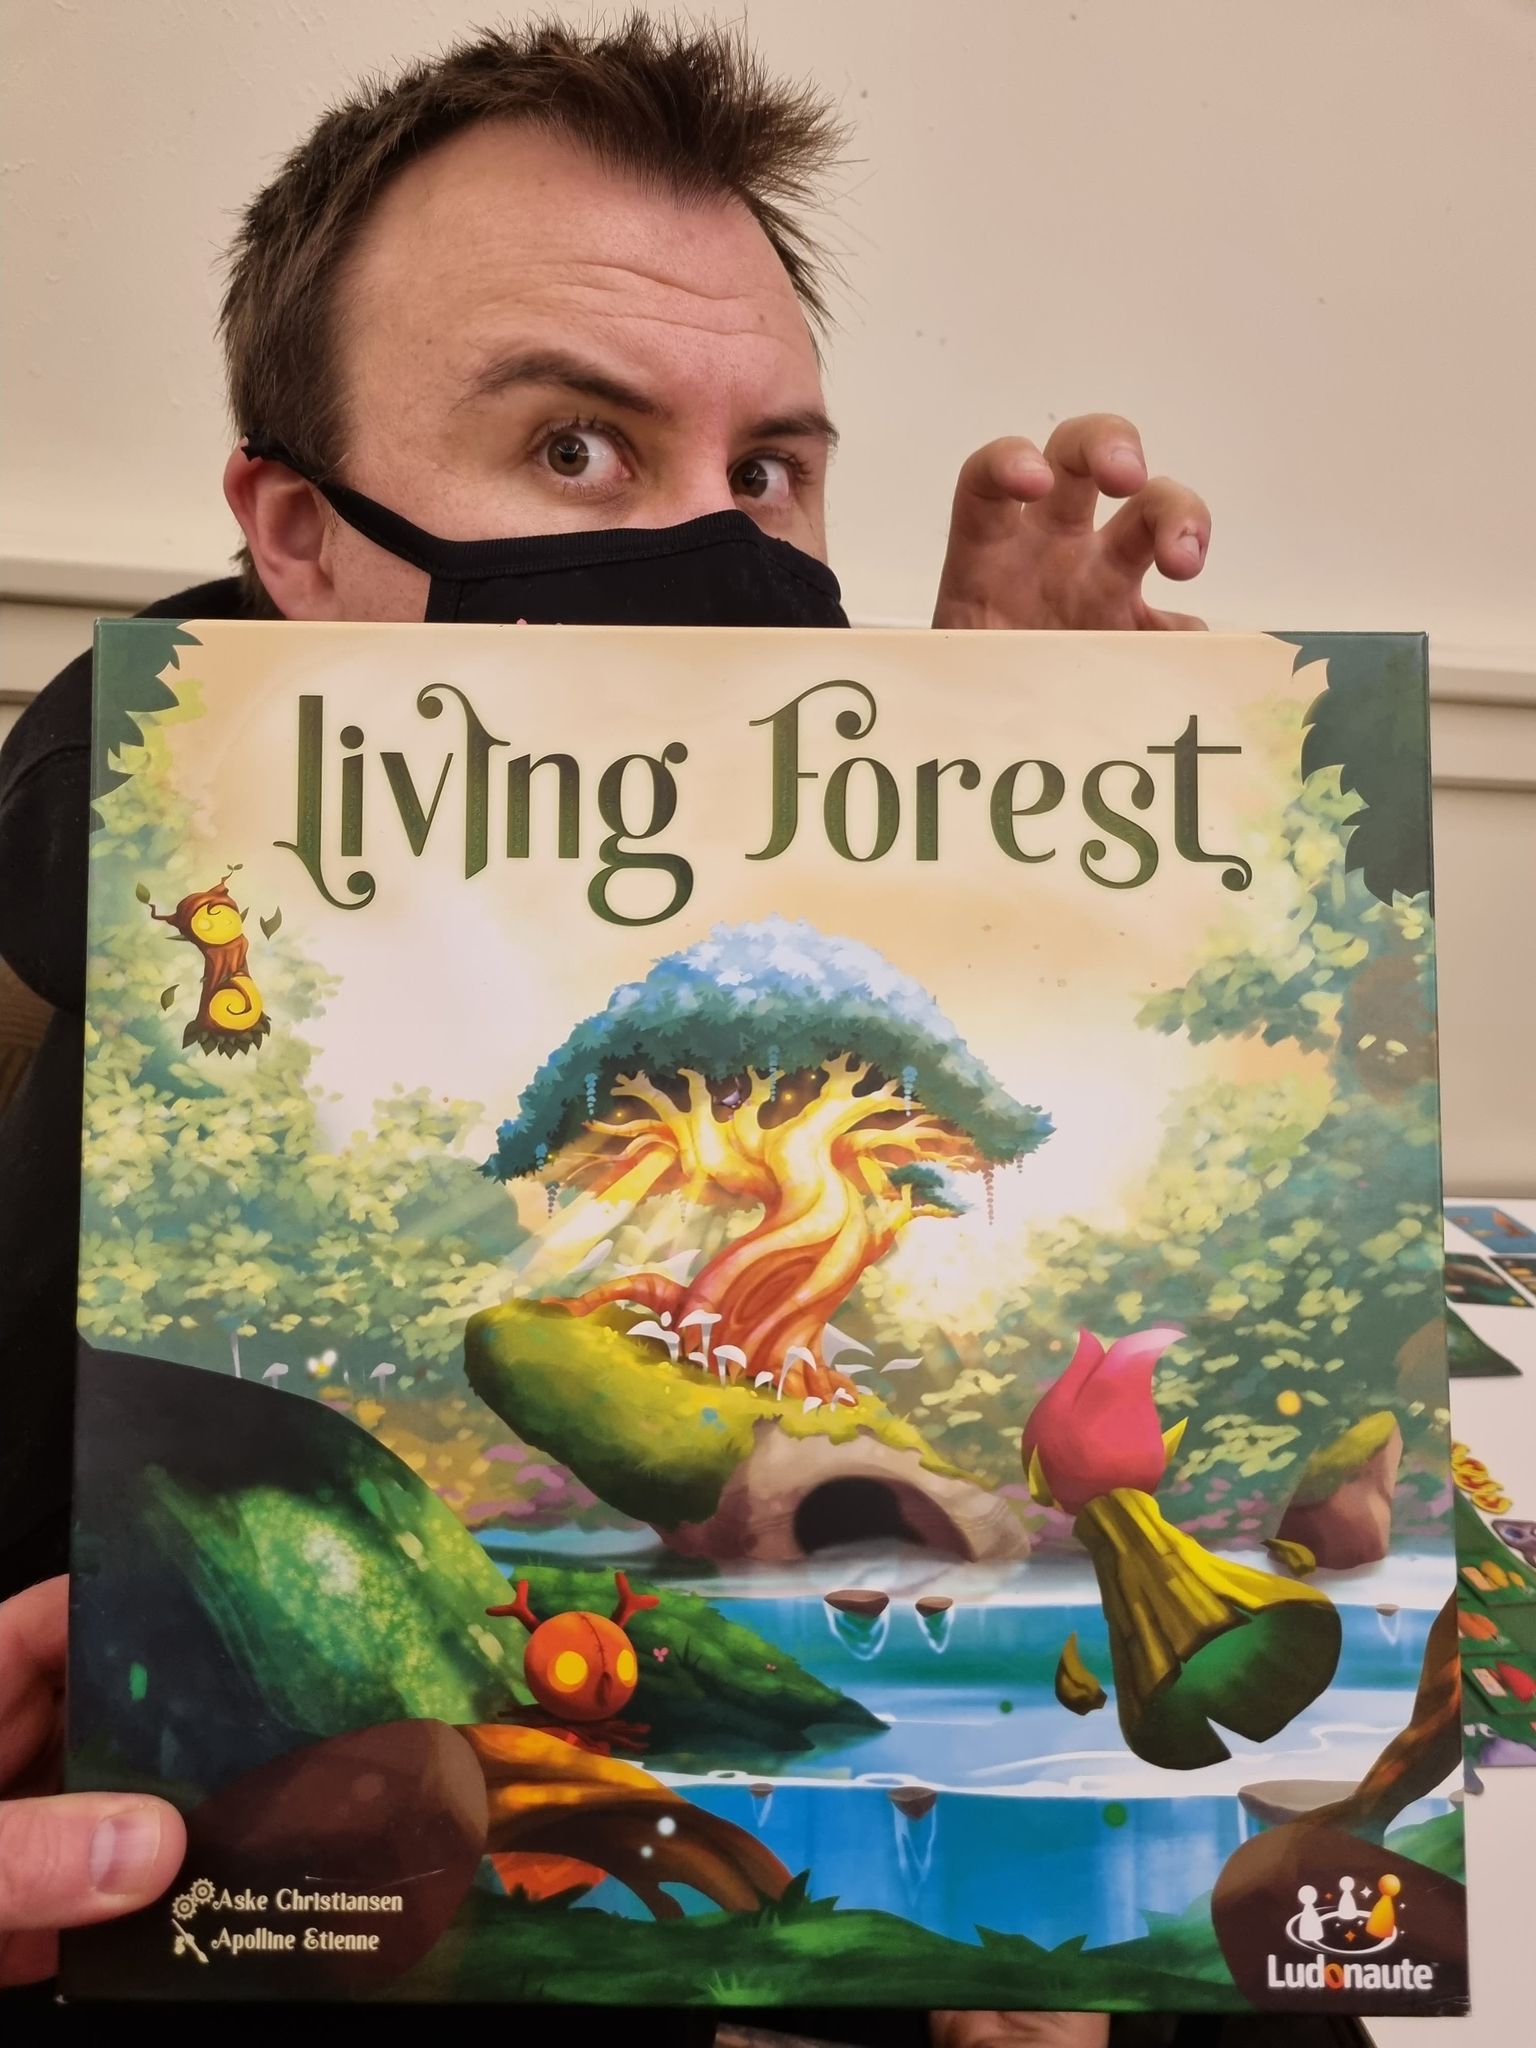 Living Forest boardgame